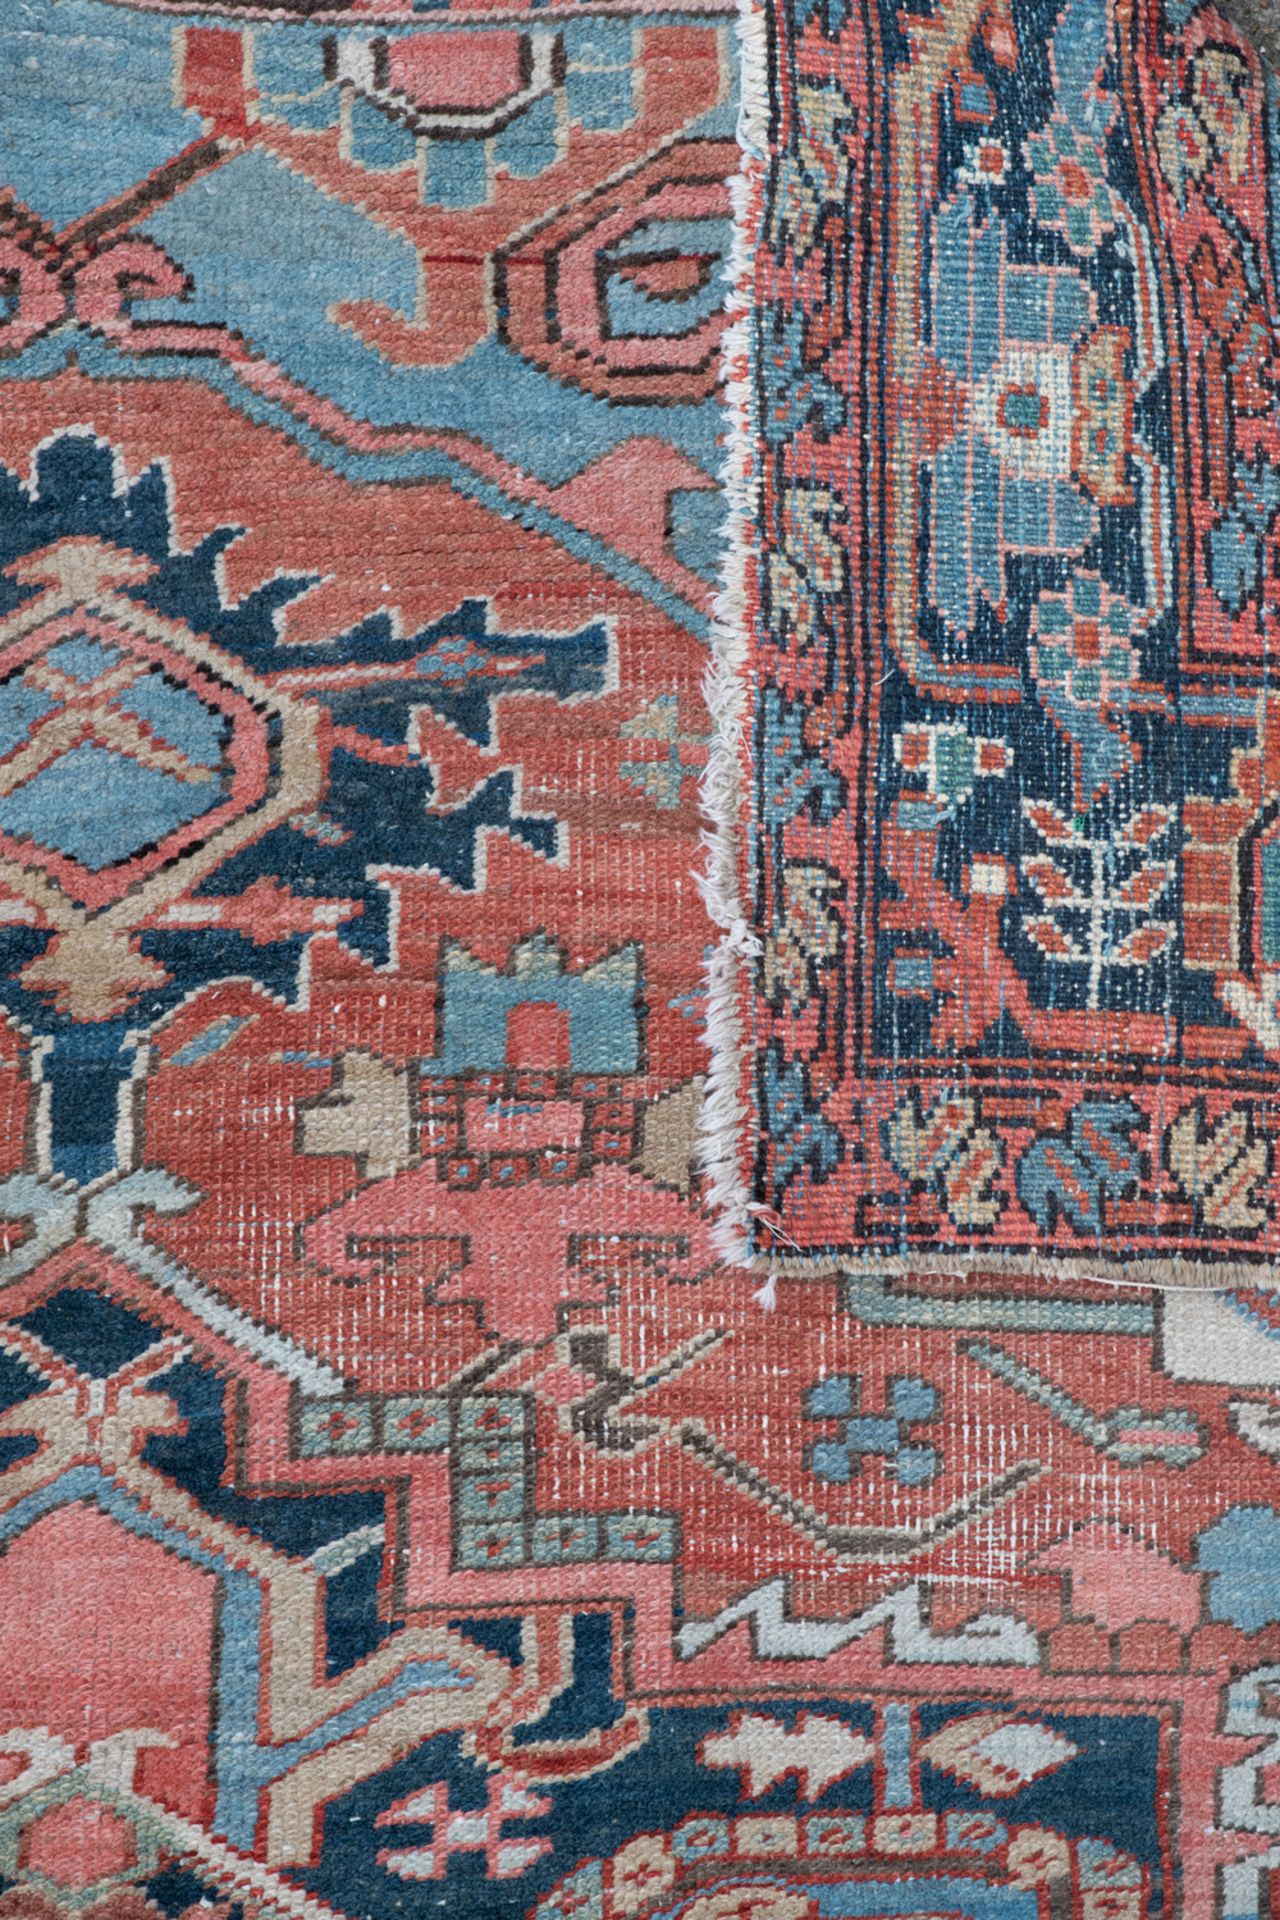 An Oriental rug with stylized floral motifs, wool on cotton, Heriz, 234 x 306 cm - Image 3 of 3